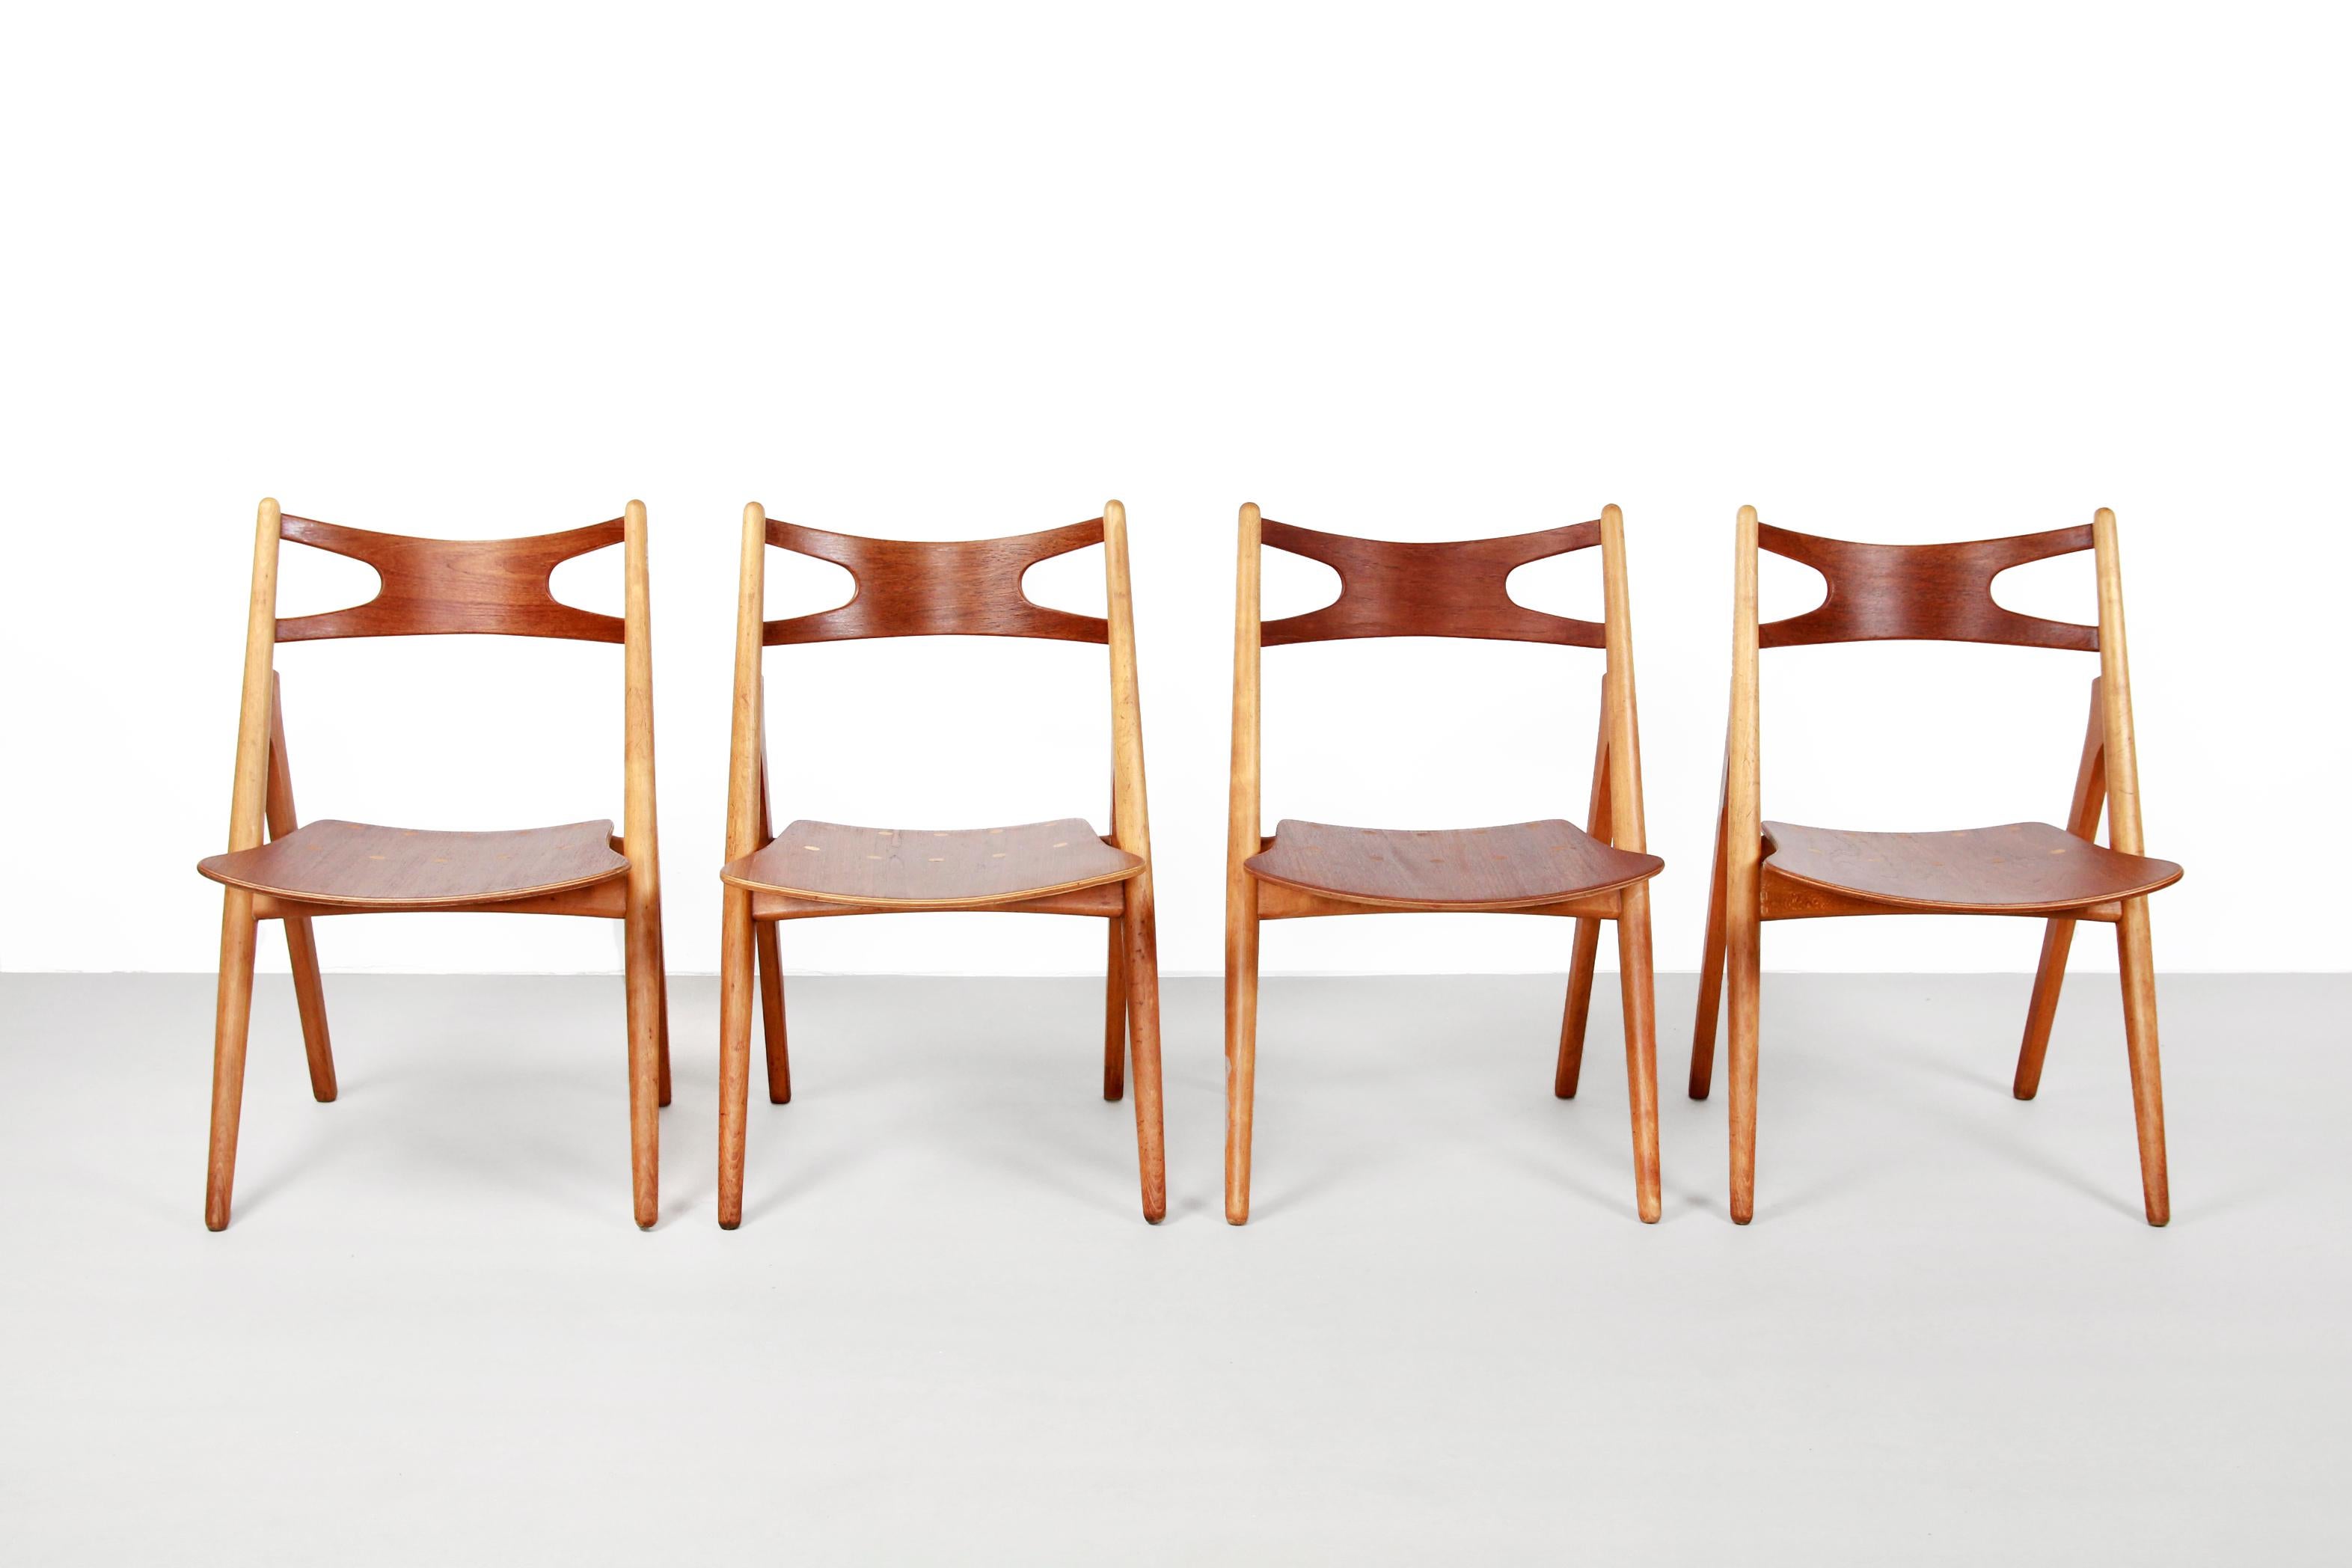 Very nice dining room chairs, designed by Hans Wegner and produced by Carl Hansen and Son in Odense, Denmark. It is a very old set in good condition. The frame of the chairs consists of solid beech wood and the seat and backrest of veneered teak.